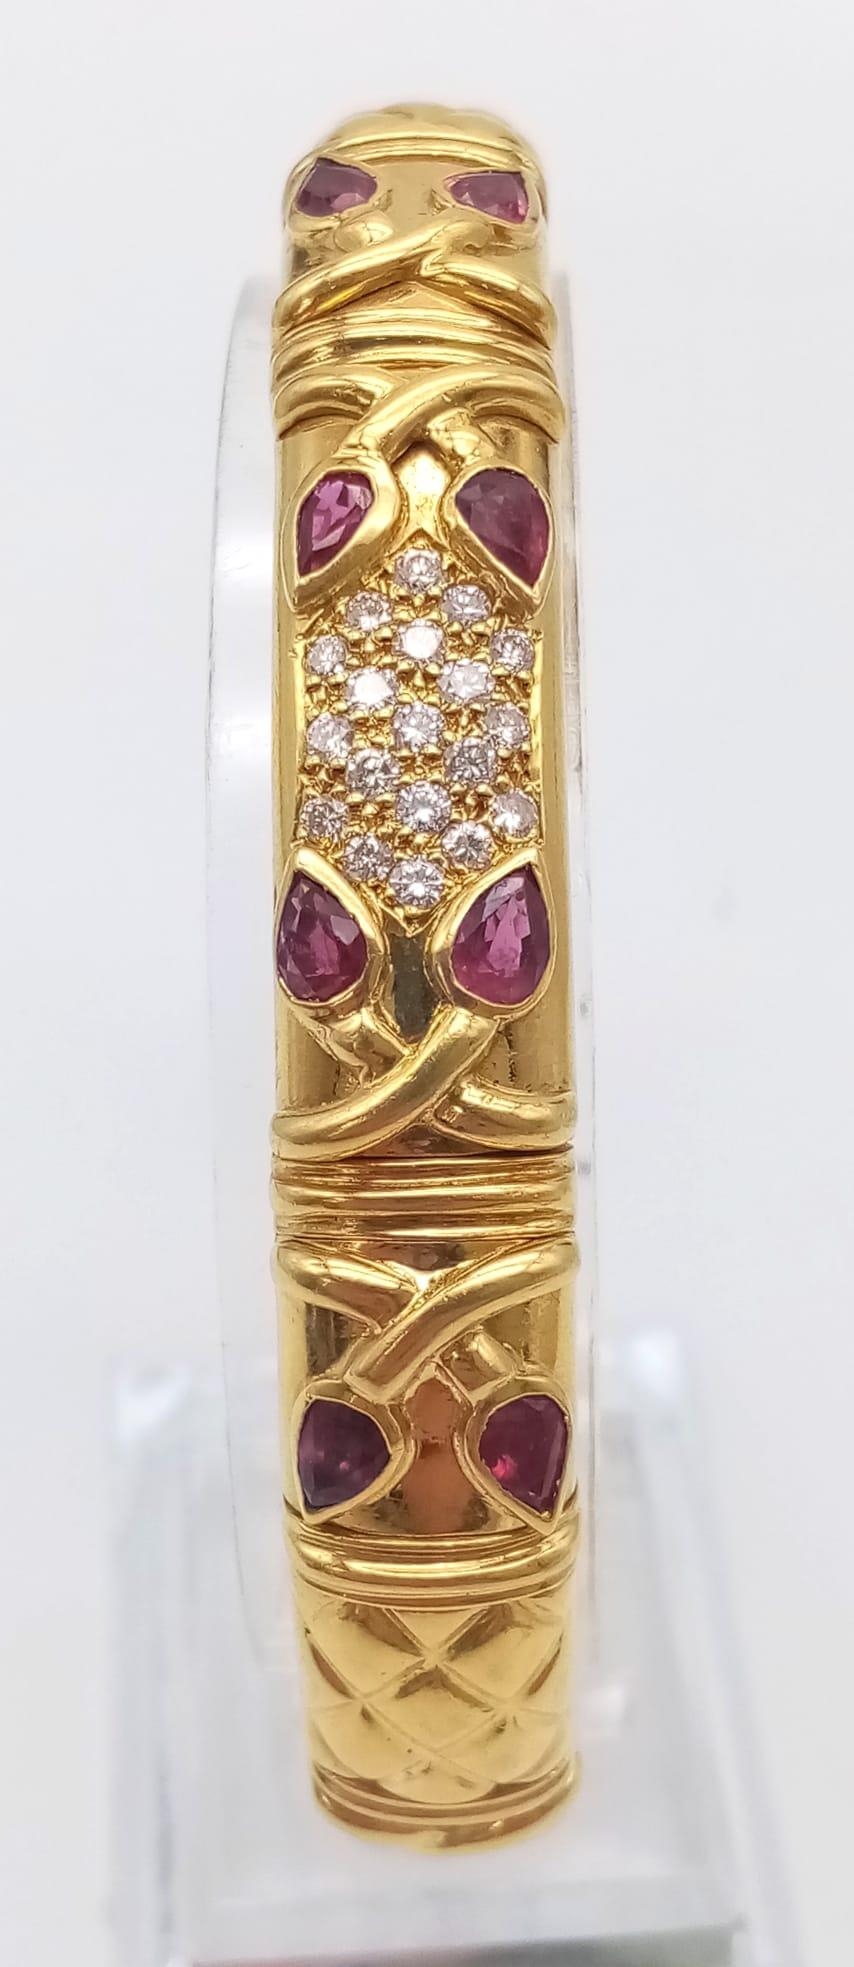 AN 18K GOLD STUNNING INNER PIERCED BANGLE WITH BEAUTIFUL OUTER WORK AND DECORATED WITH DIAMONDS - Image 4 of 6